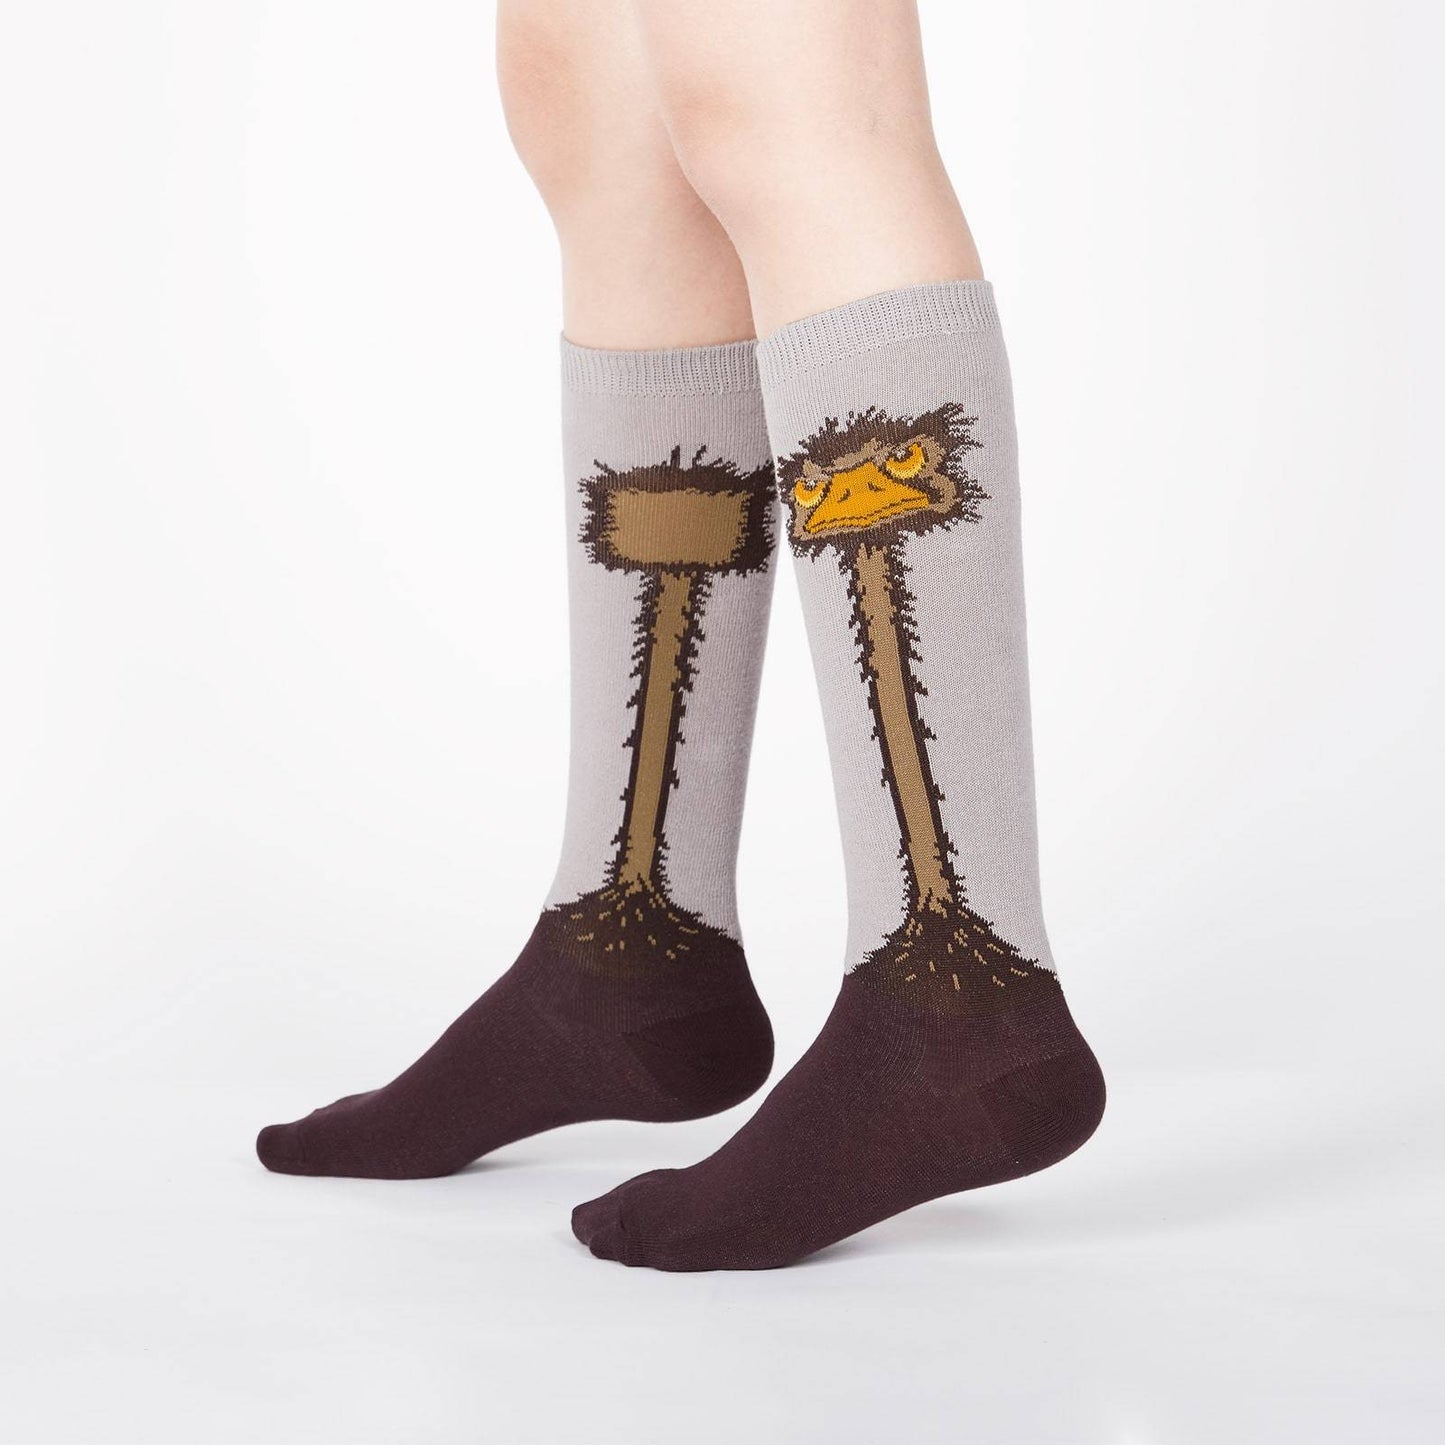 Sock it to me Ostrich Youth (aged3-6) Knee High Socks